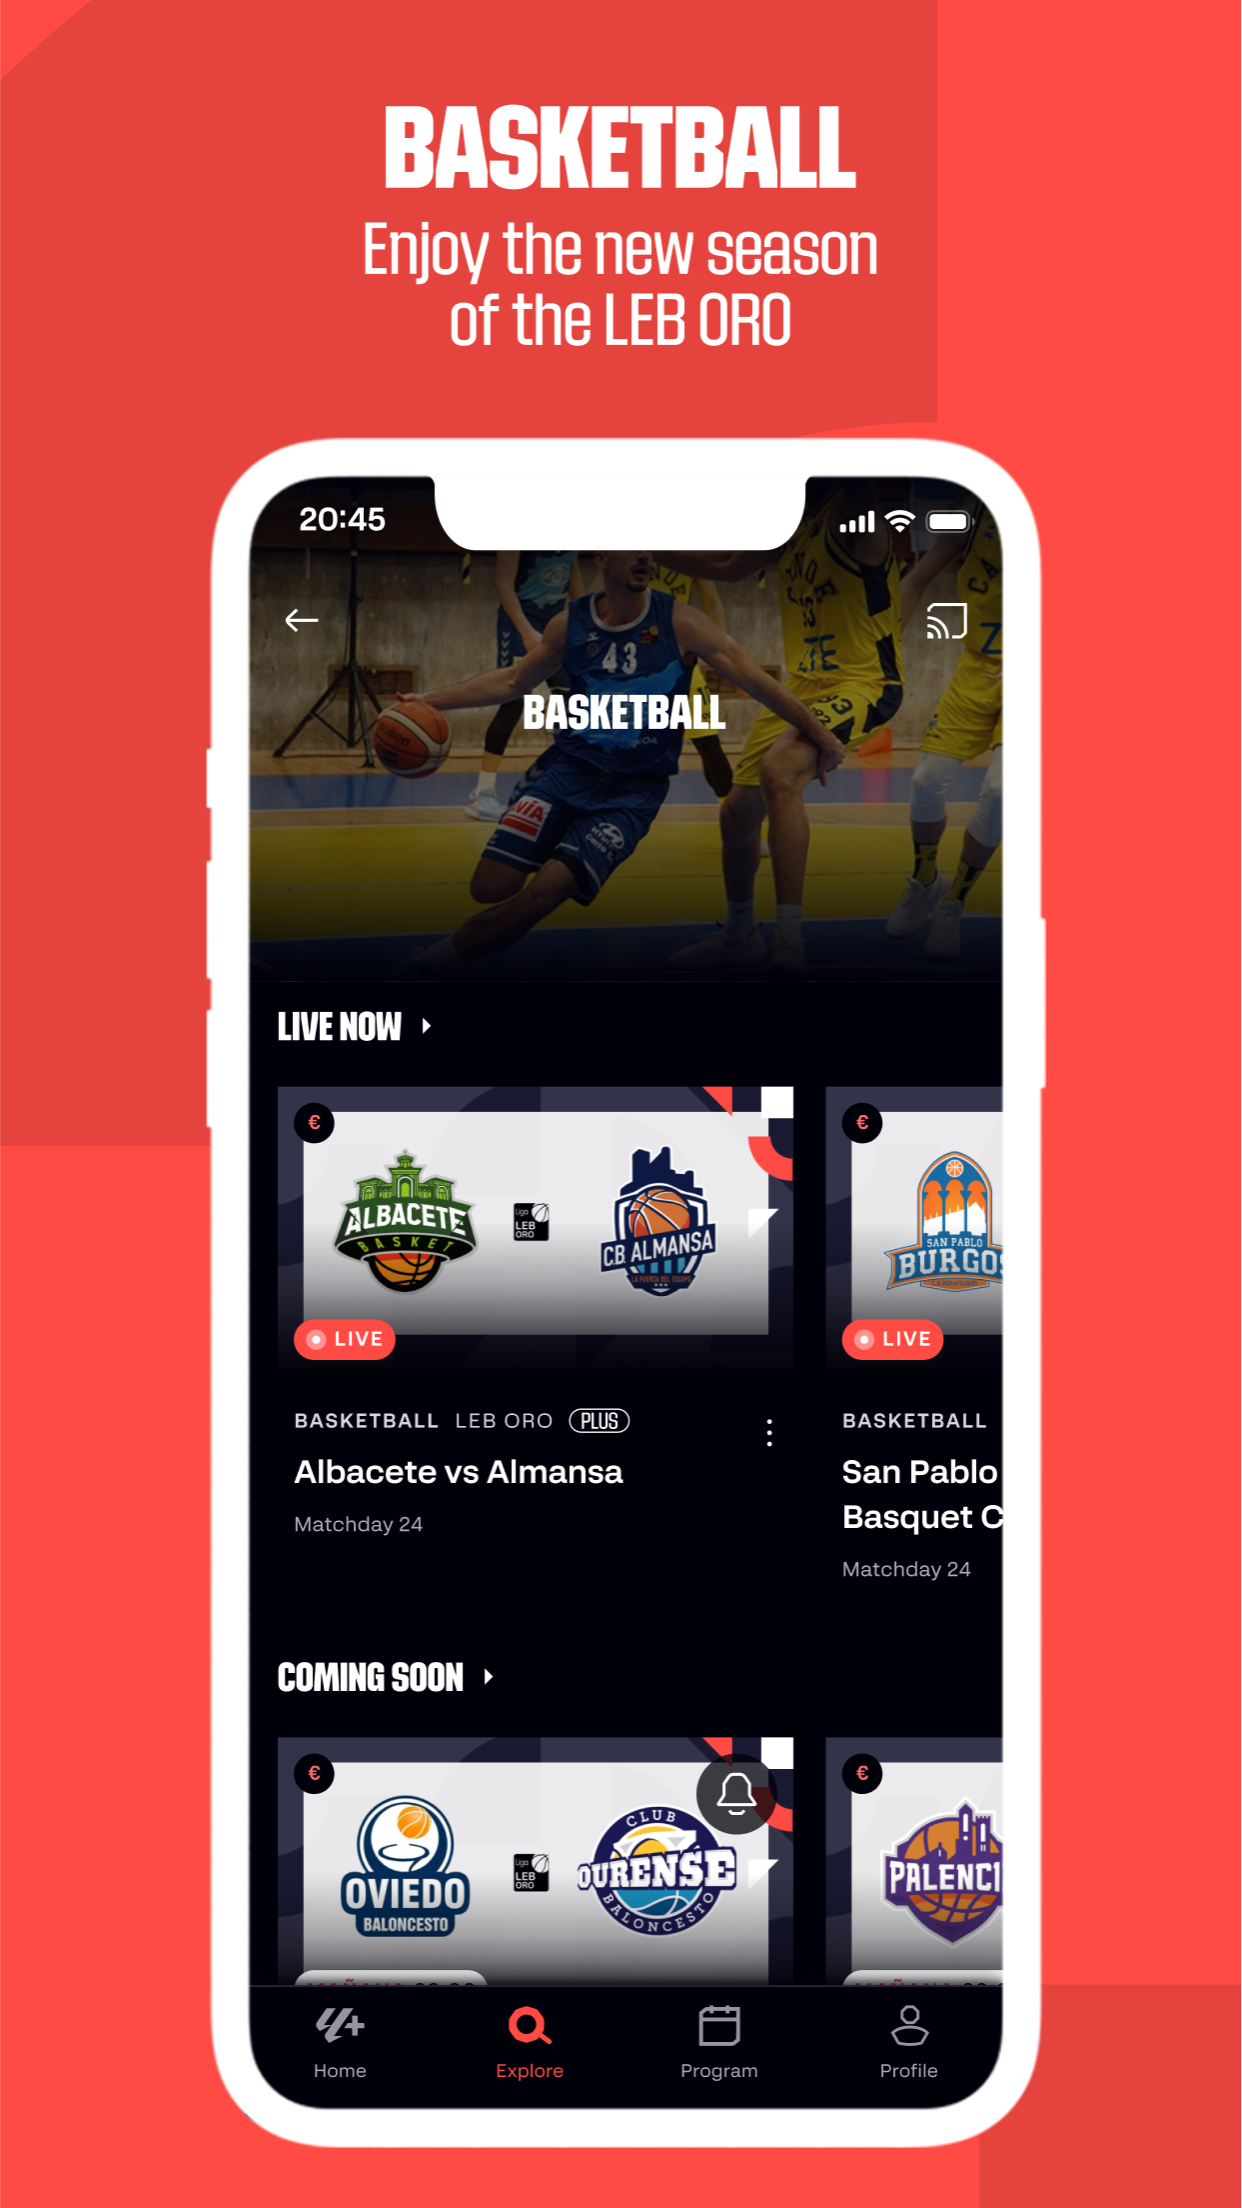 Top Sports Apps for iPhone on the iOS App Store in Nepal · Appfigures